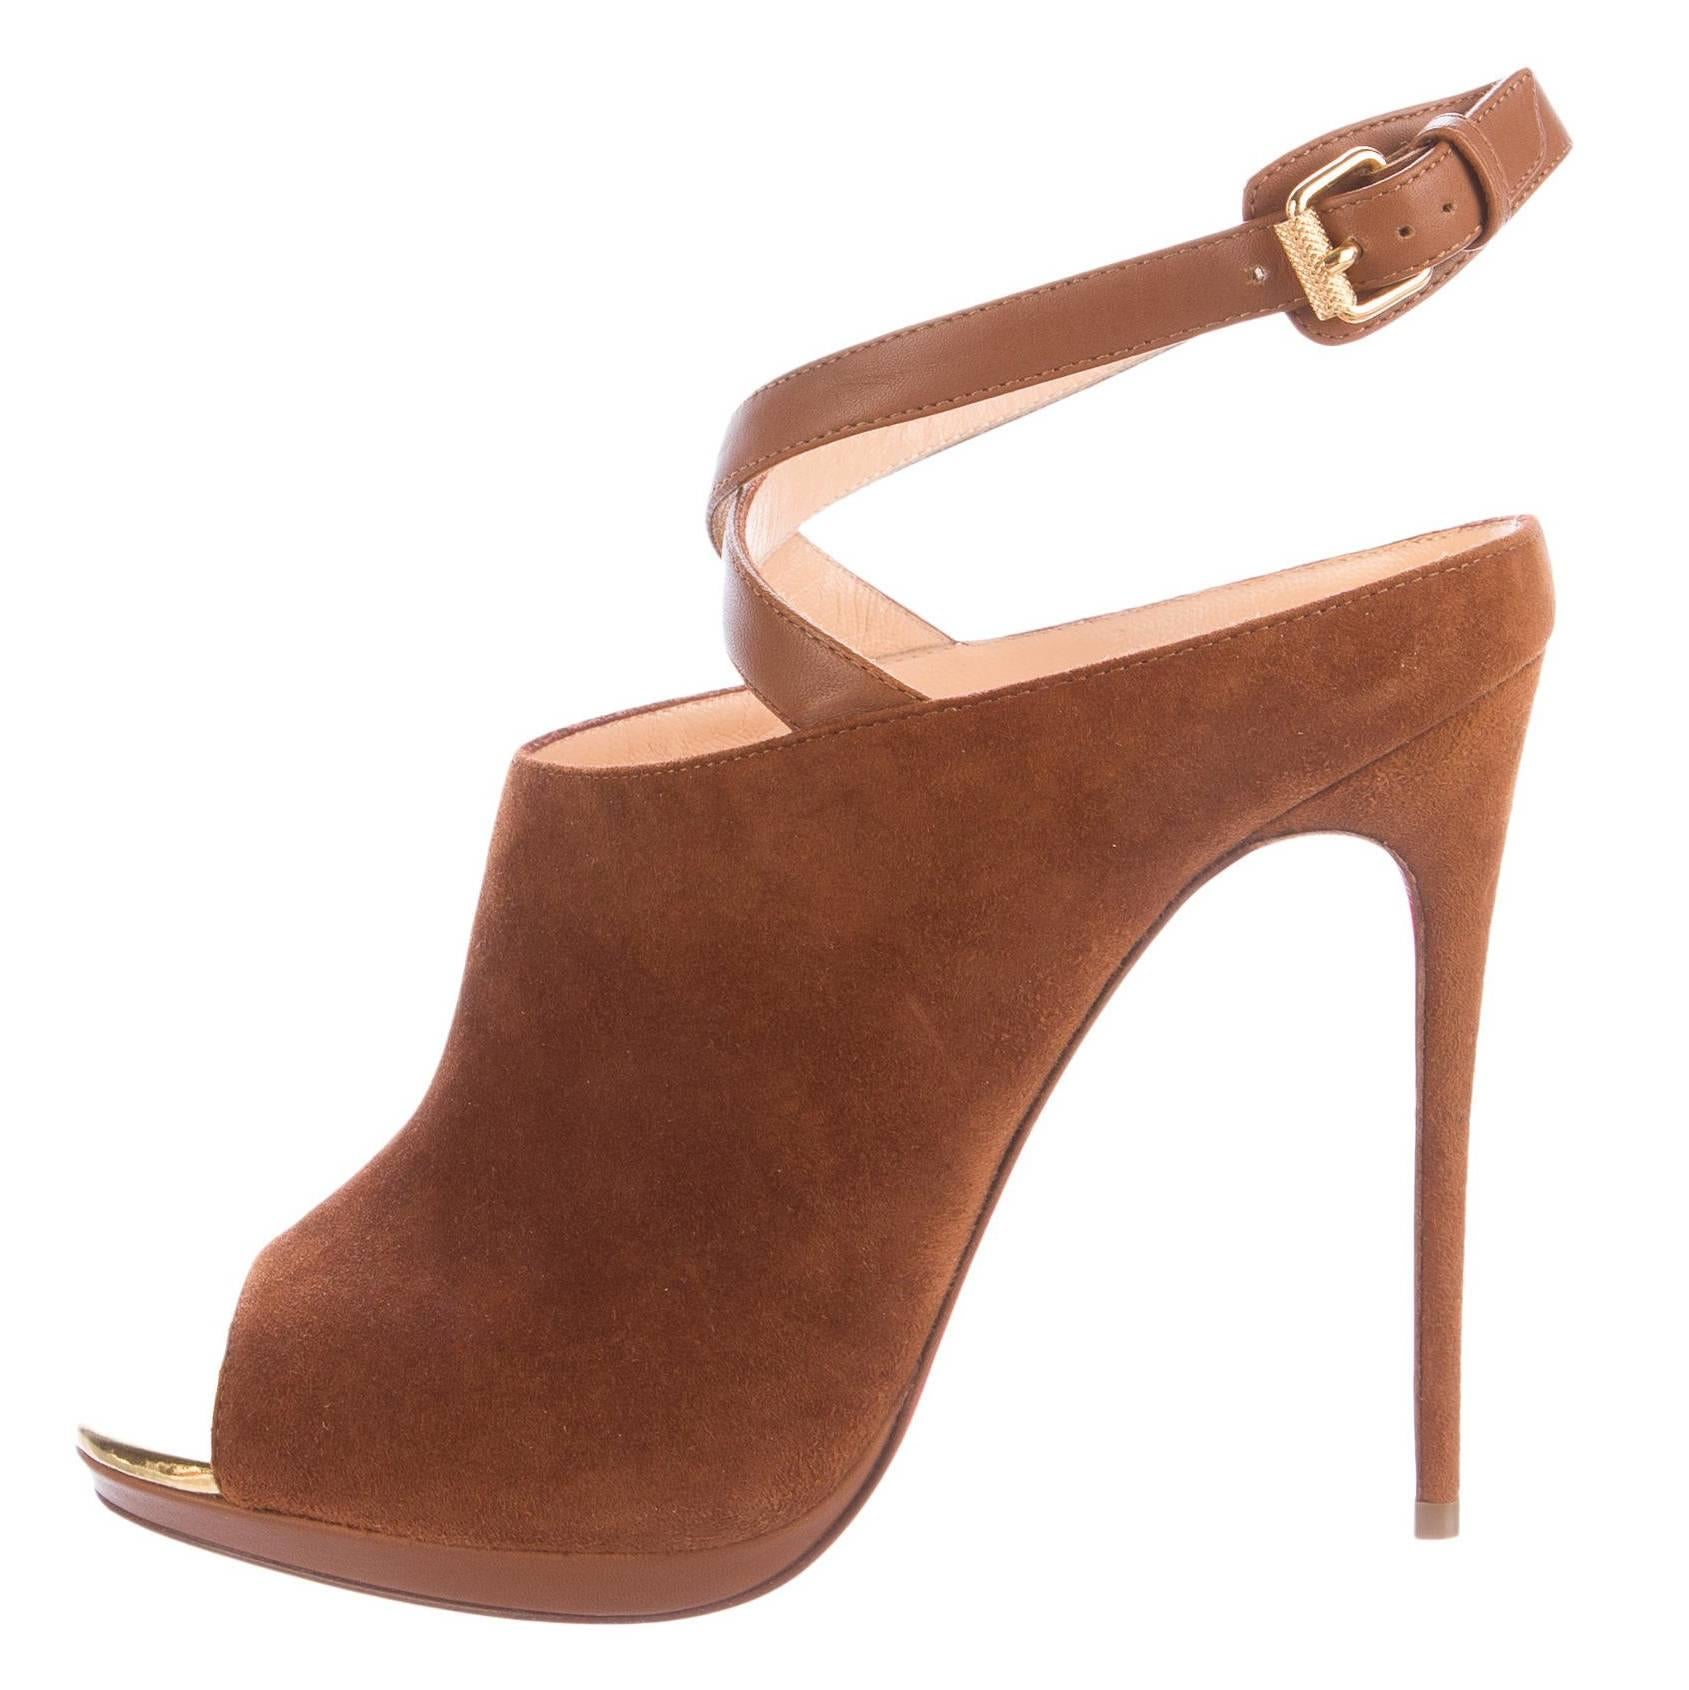 Christian Louboutin NEW Cognac Suede Peep Toe Ankle Sandals Heels in Box